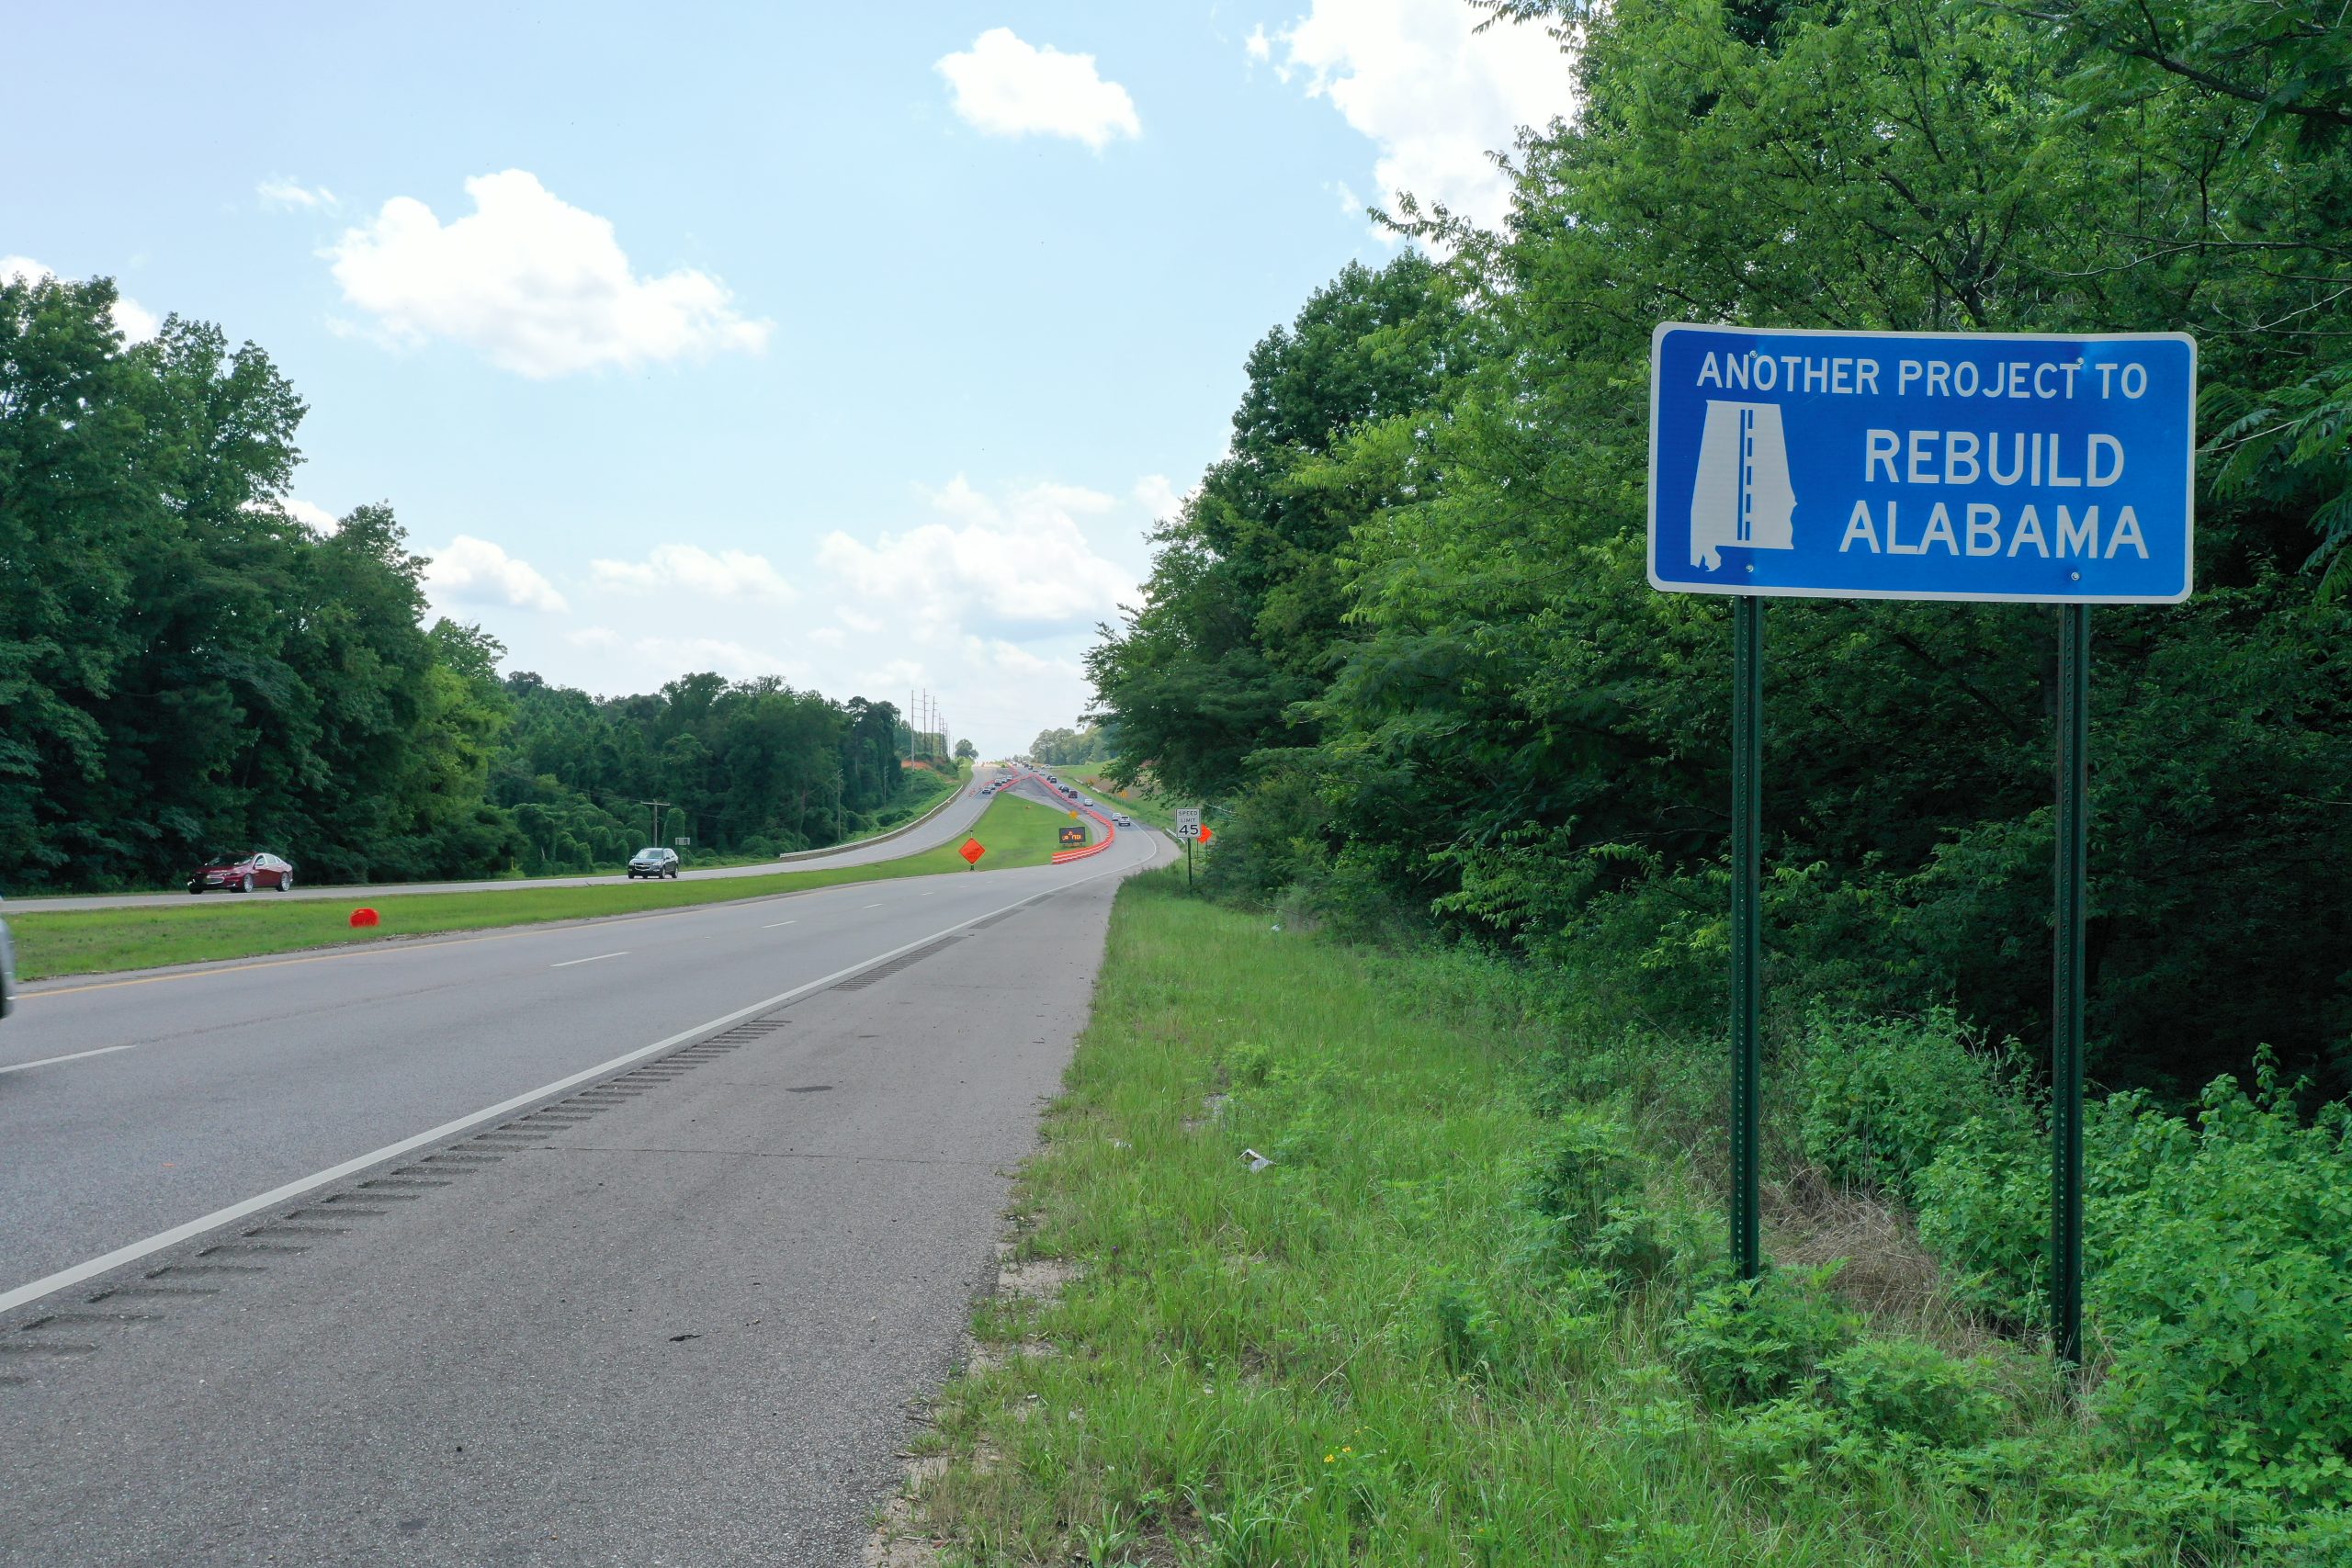 Rebuild Alabama road sign with greenery and roadway in the background